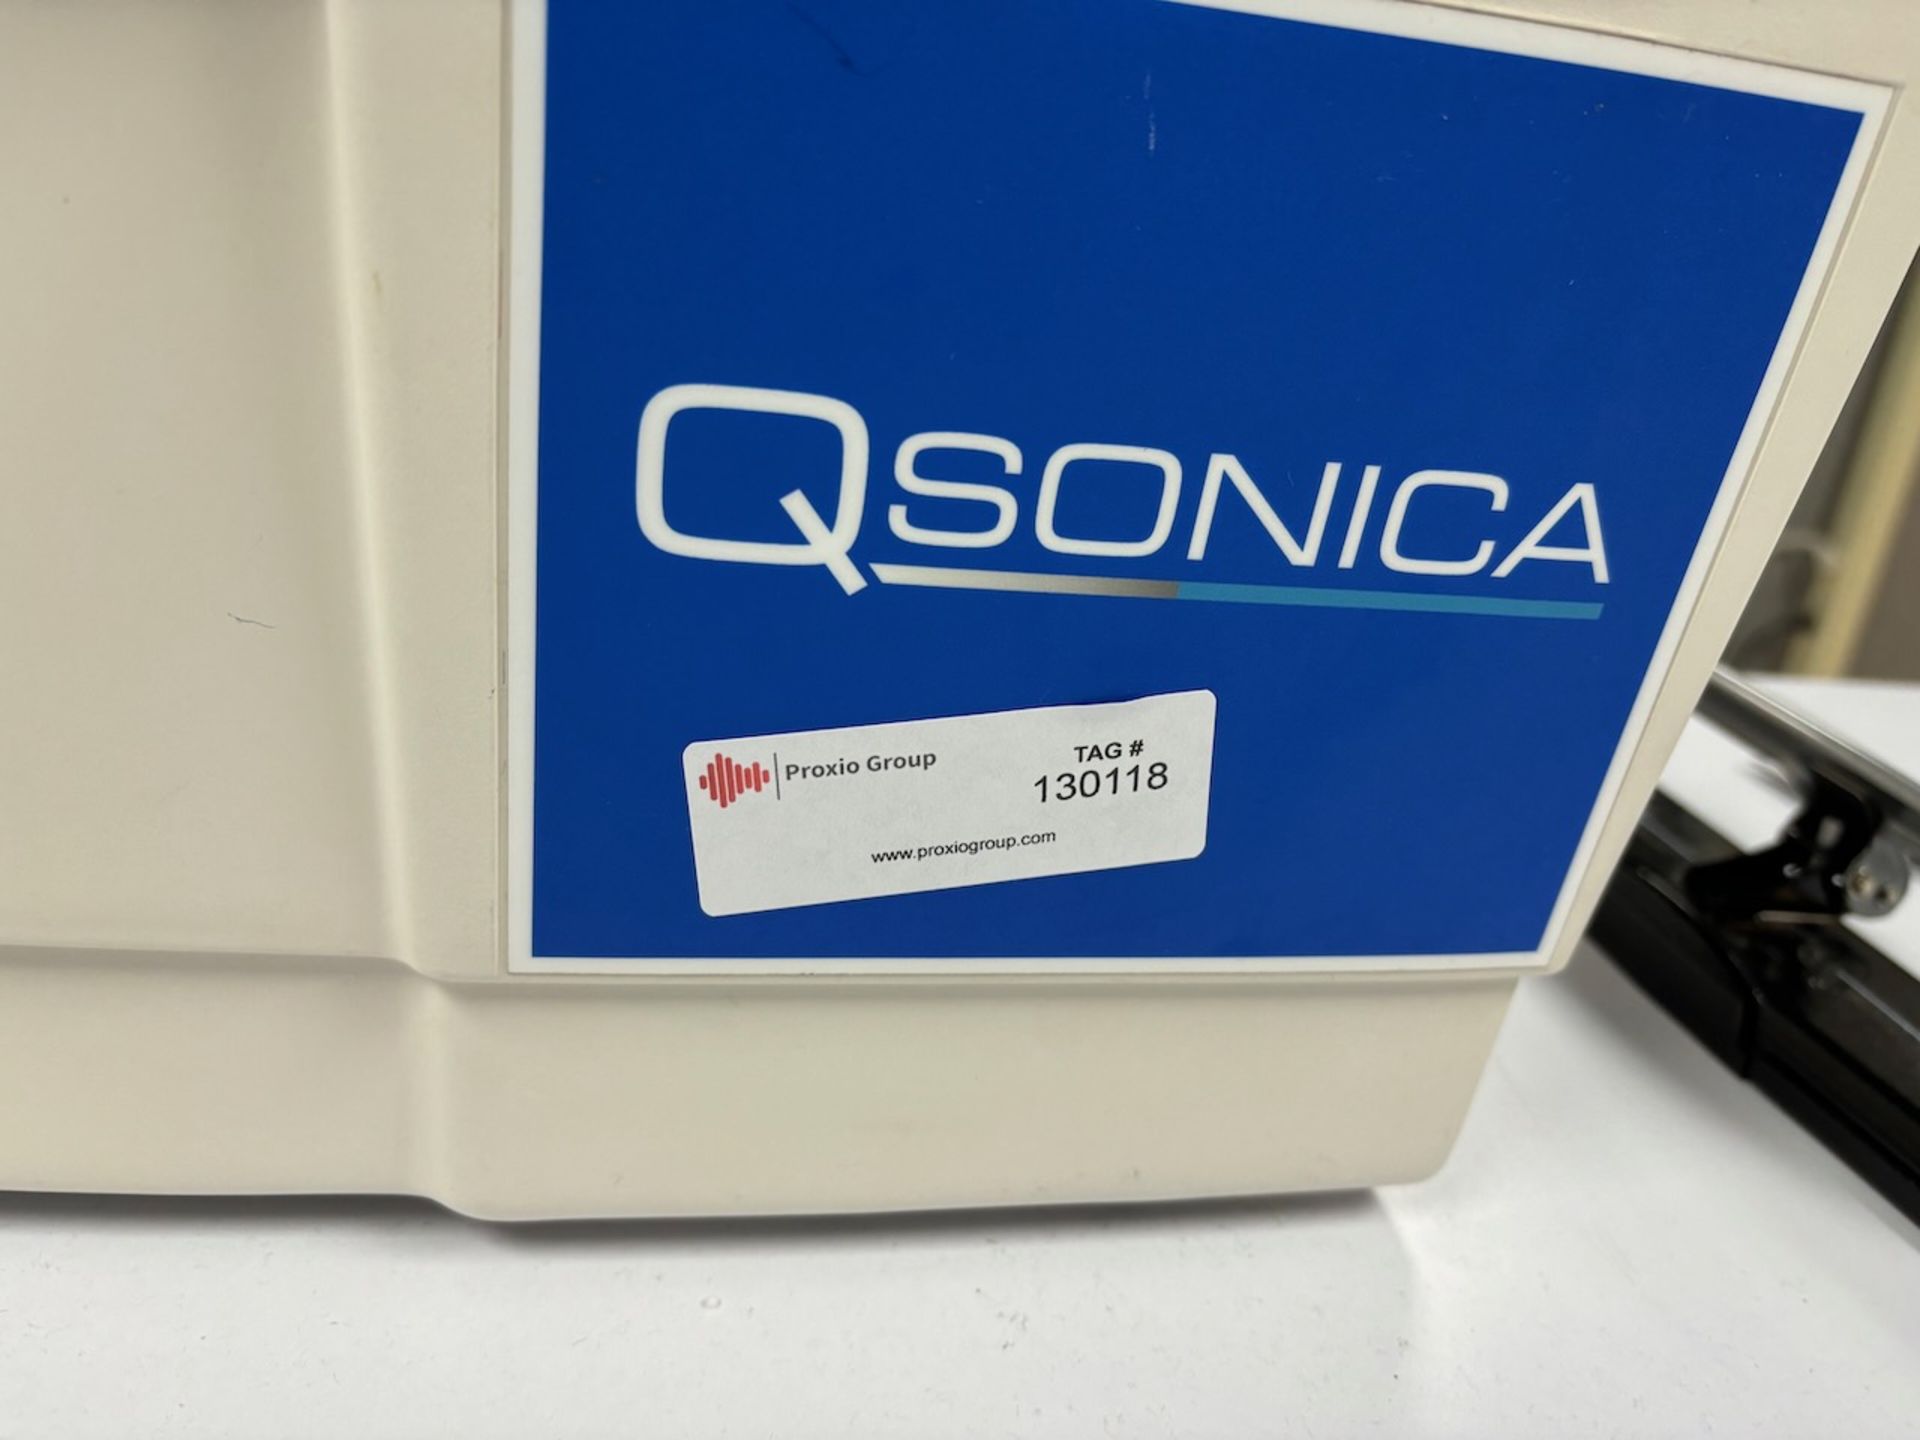 Qsonica Ultrasonic Cleaner - Image 2 of 5